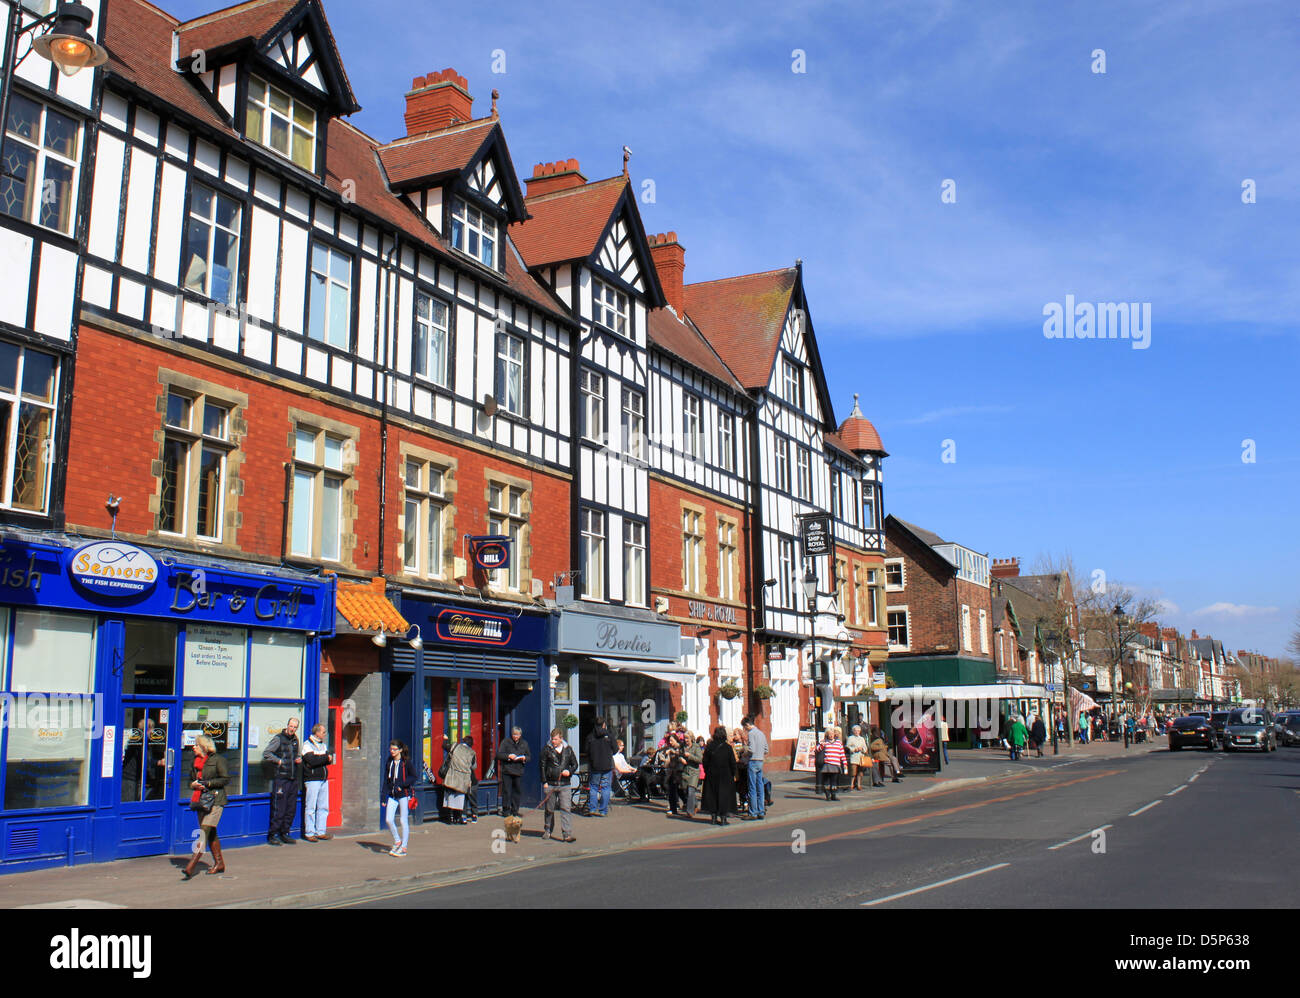 Shops on Clifton street in Lytham, Lytham St Annes, Lancashire. Stock Photo